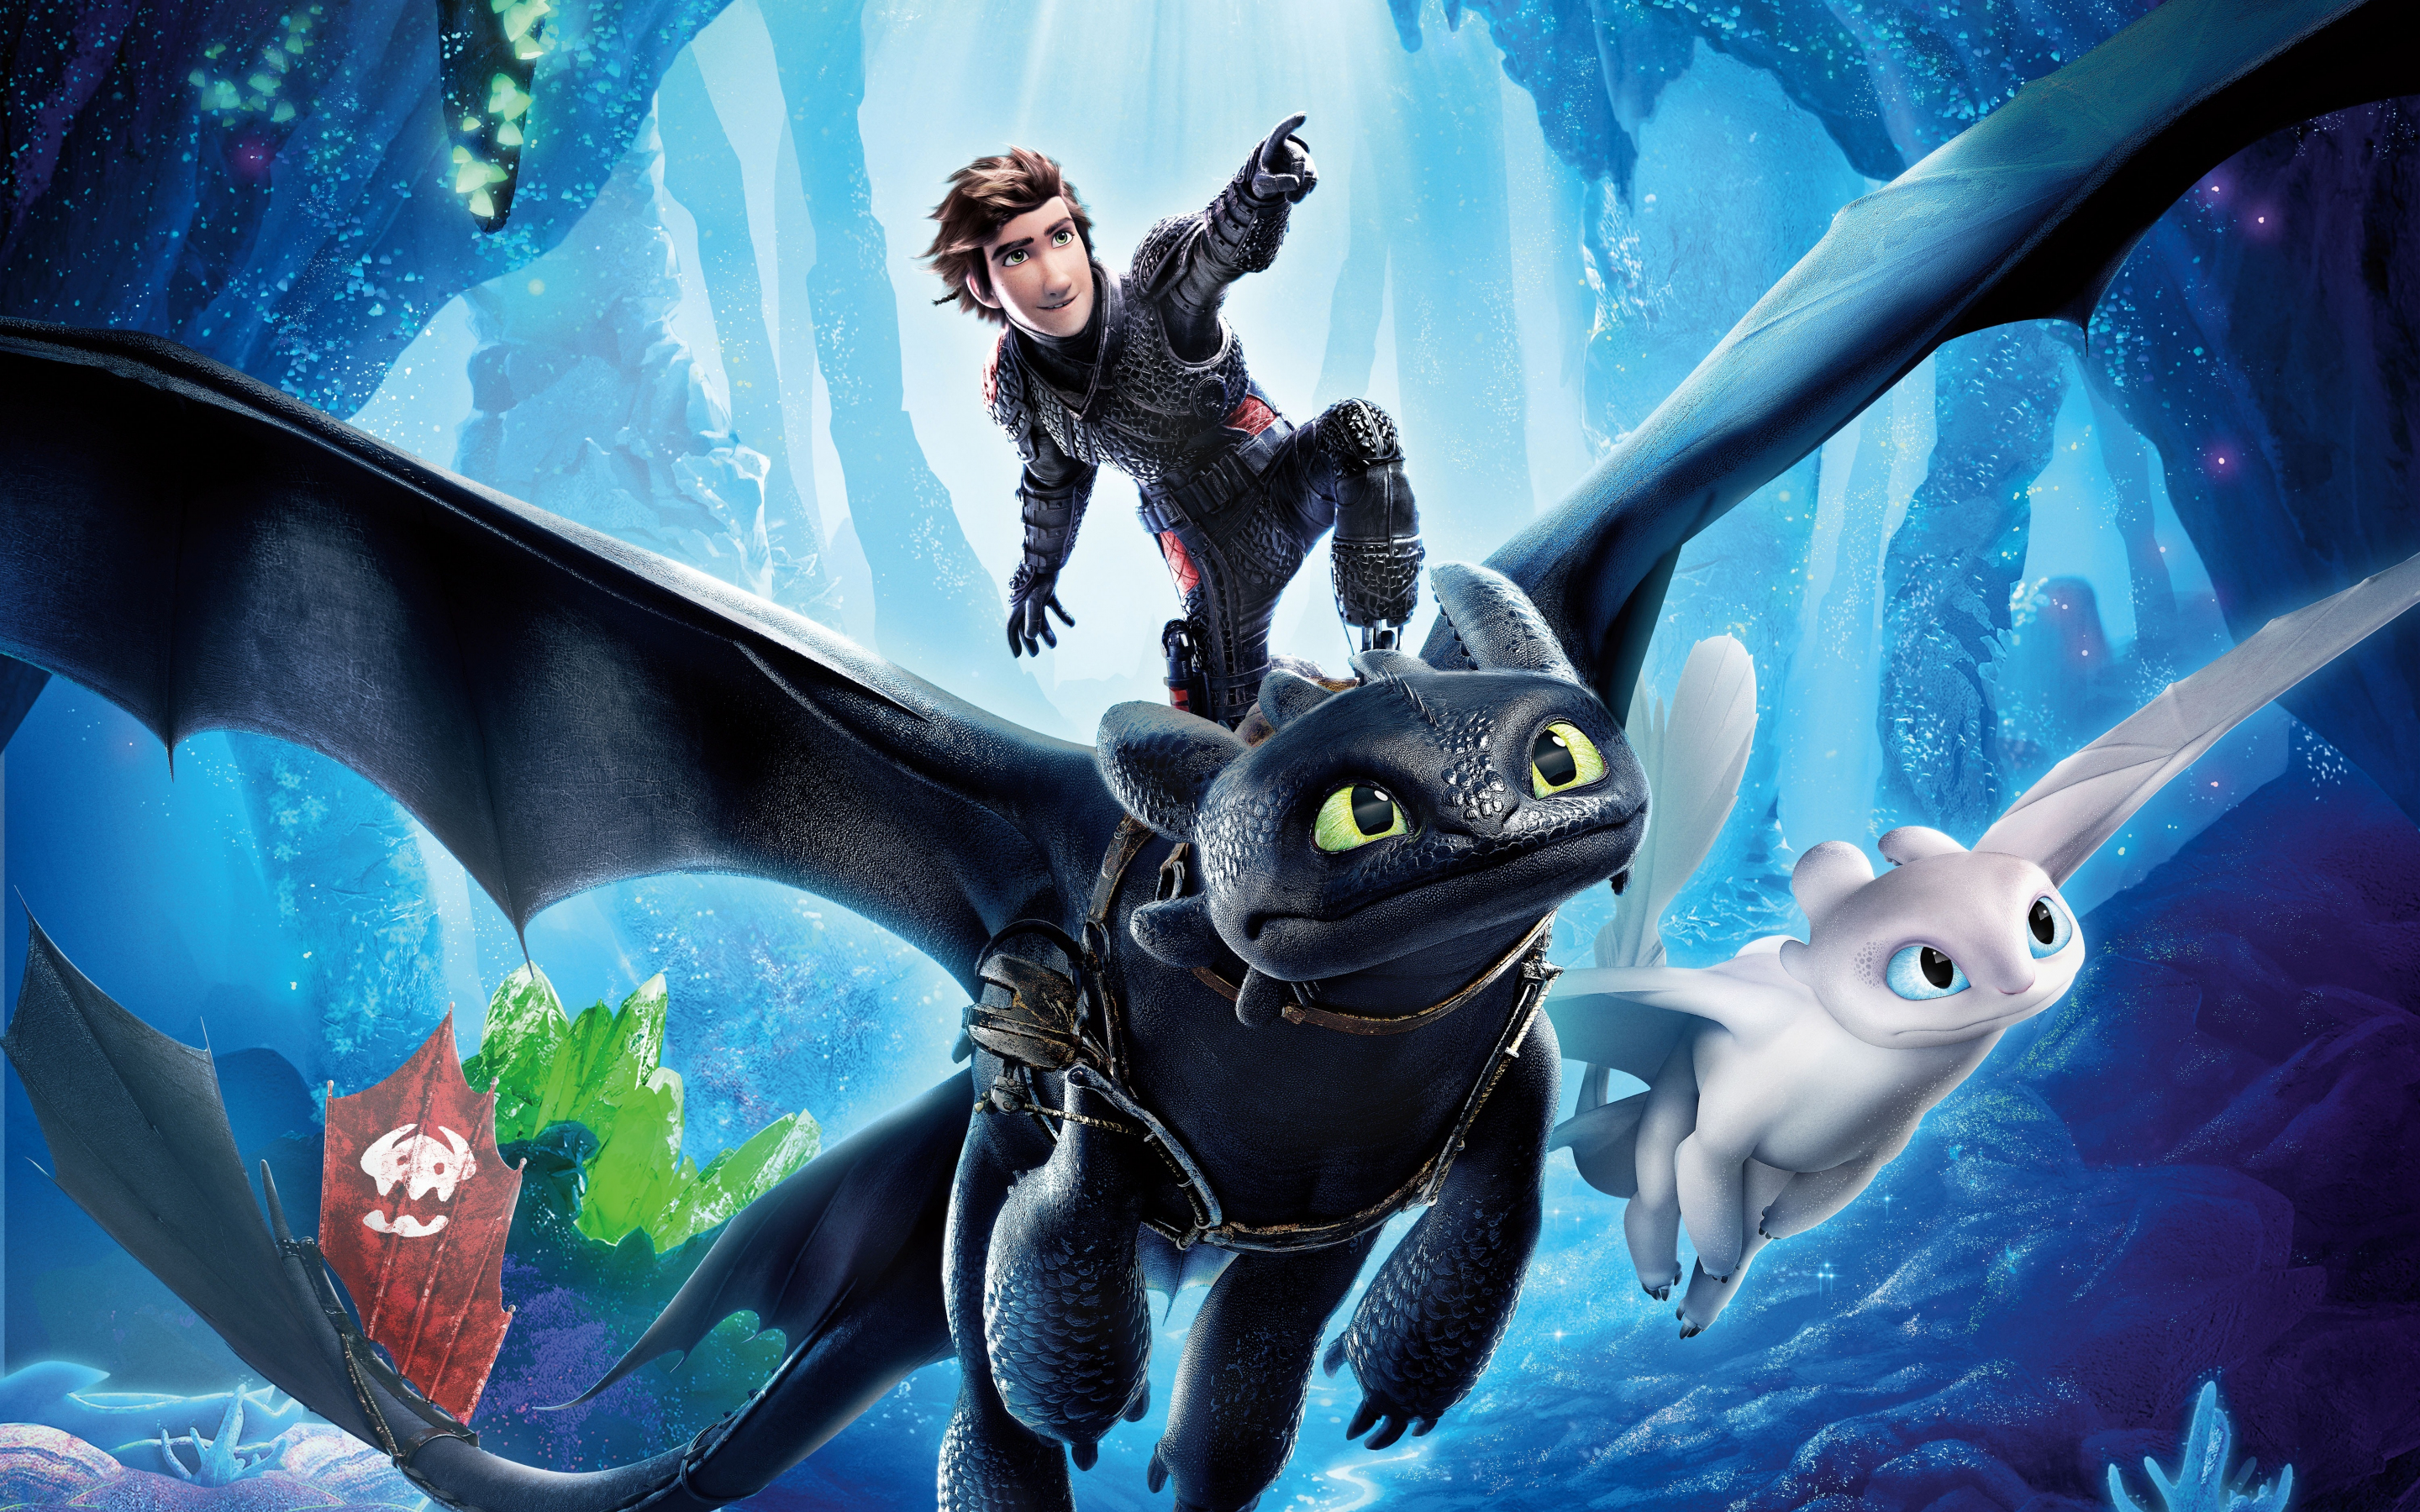 How to Train Your Dragon: The Hidden World, hiccup, toothless, dragon ride, 2880x1800 wallpaper